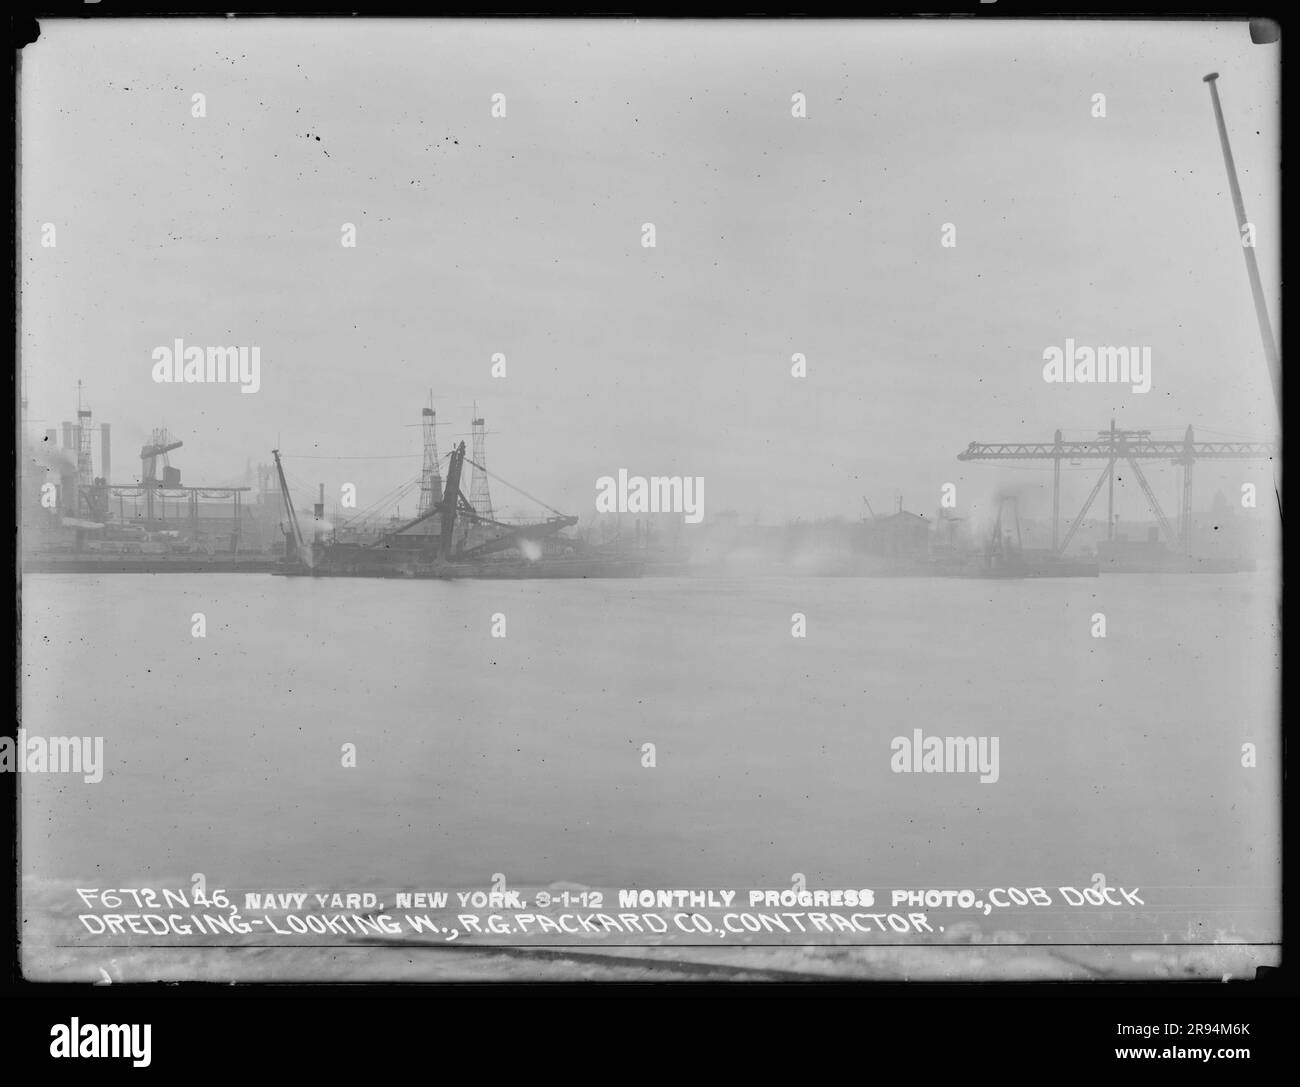 Monthly Progress Photo, Cob Dock Dredging, Looking West, R. G. Packard Company, Contractor. Glass Plate Negatives of the Construction and Repair of Buildings, Facilities, and Vessels at the New York Navy Yard. Stock Photo